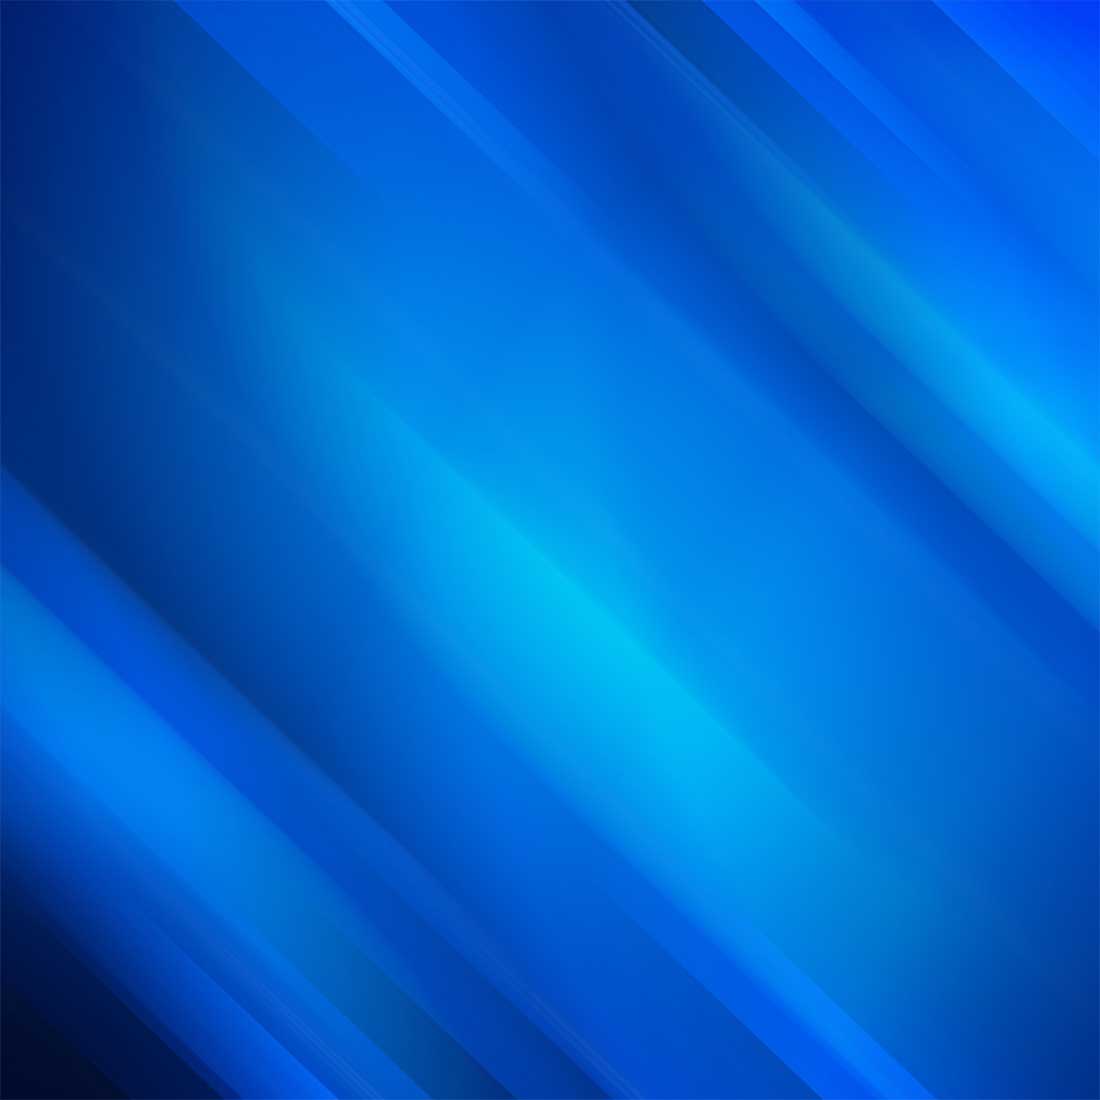 Abstract Gradient Luxury Wave Background Vivid Blurred Colorful Texture Wallpaper Photo cover image.